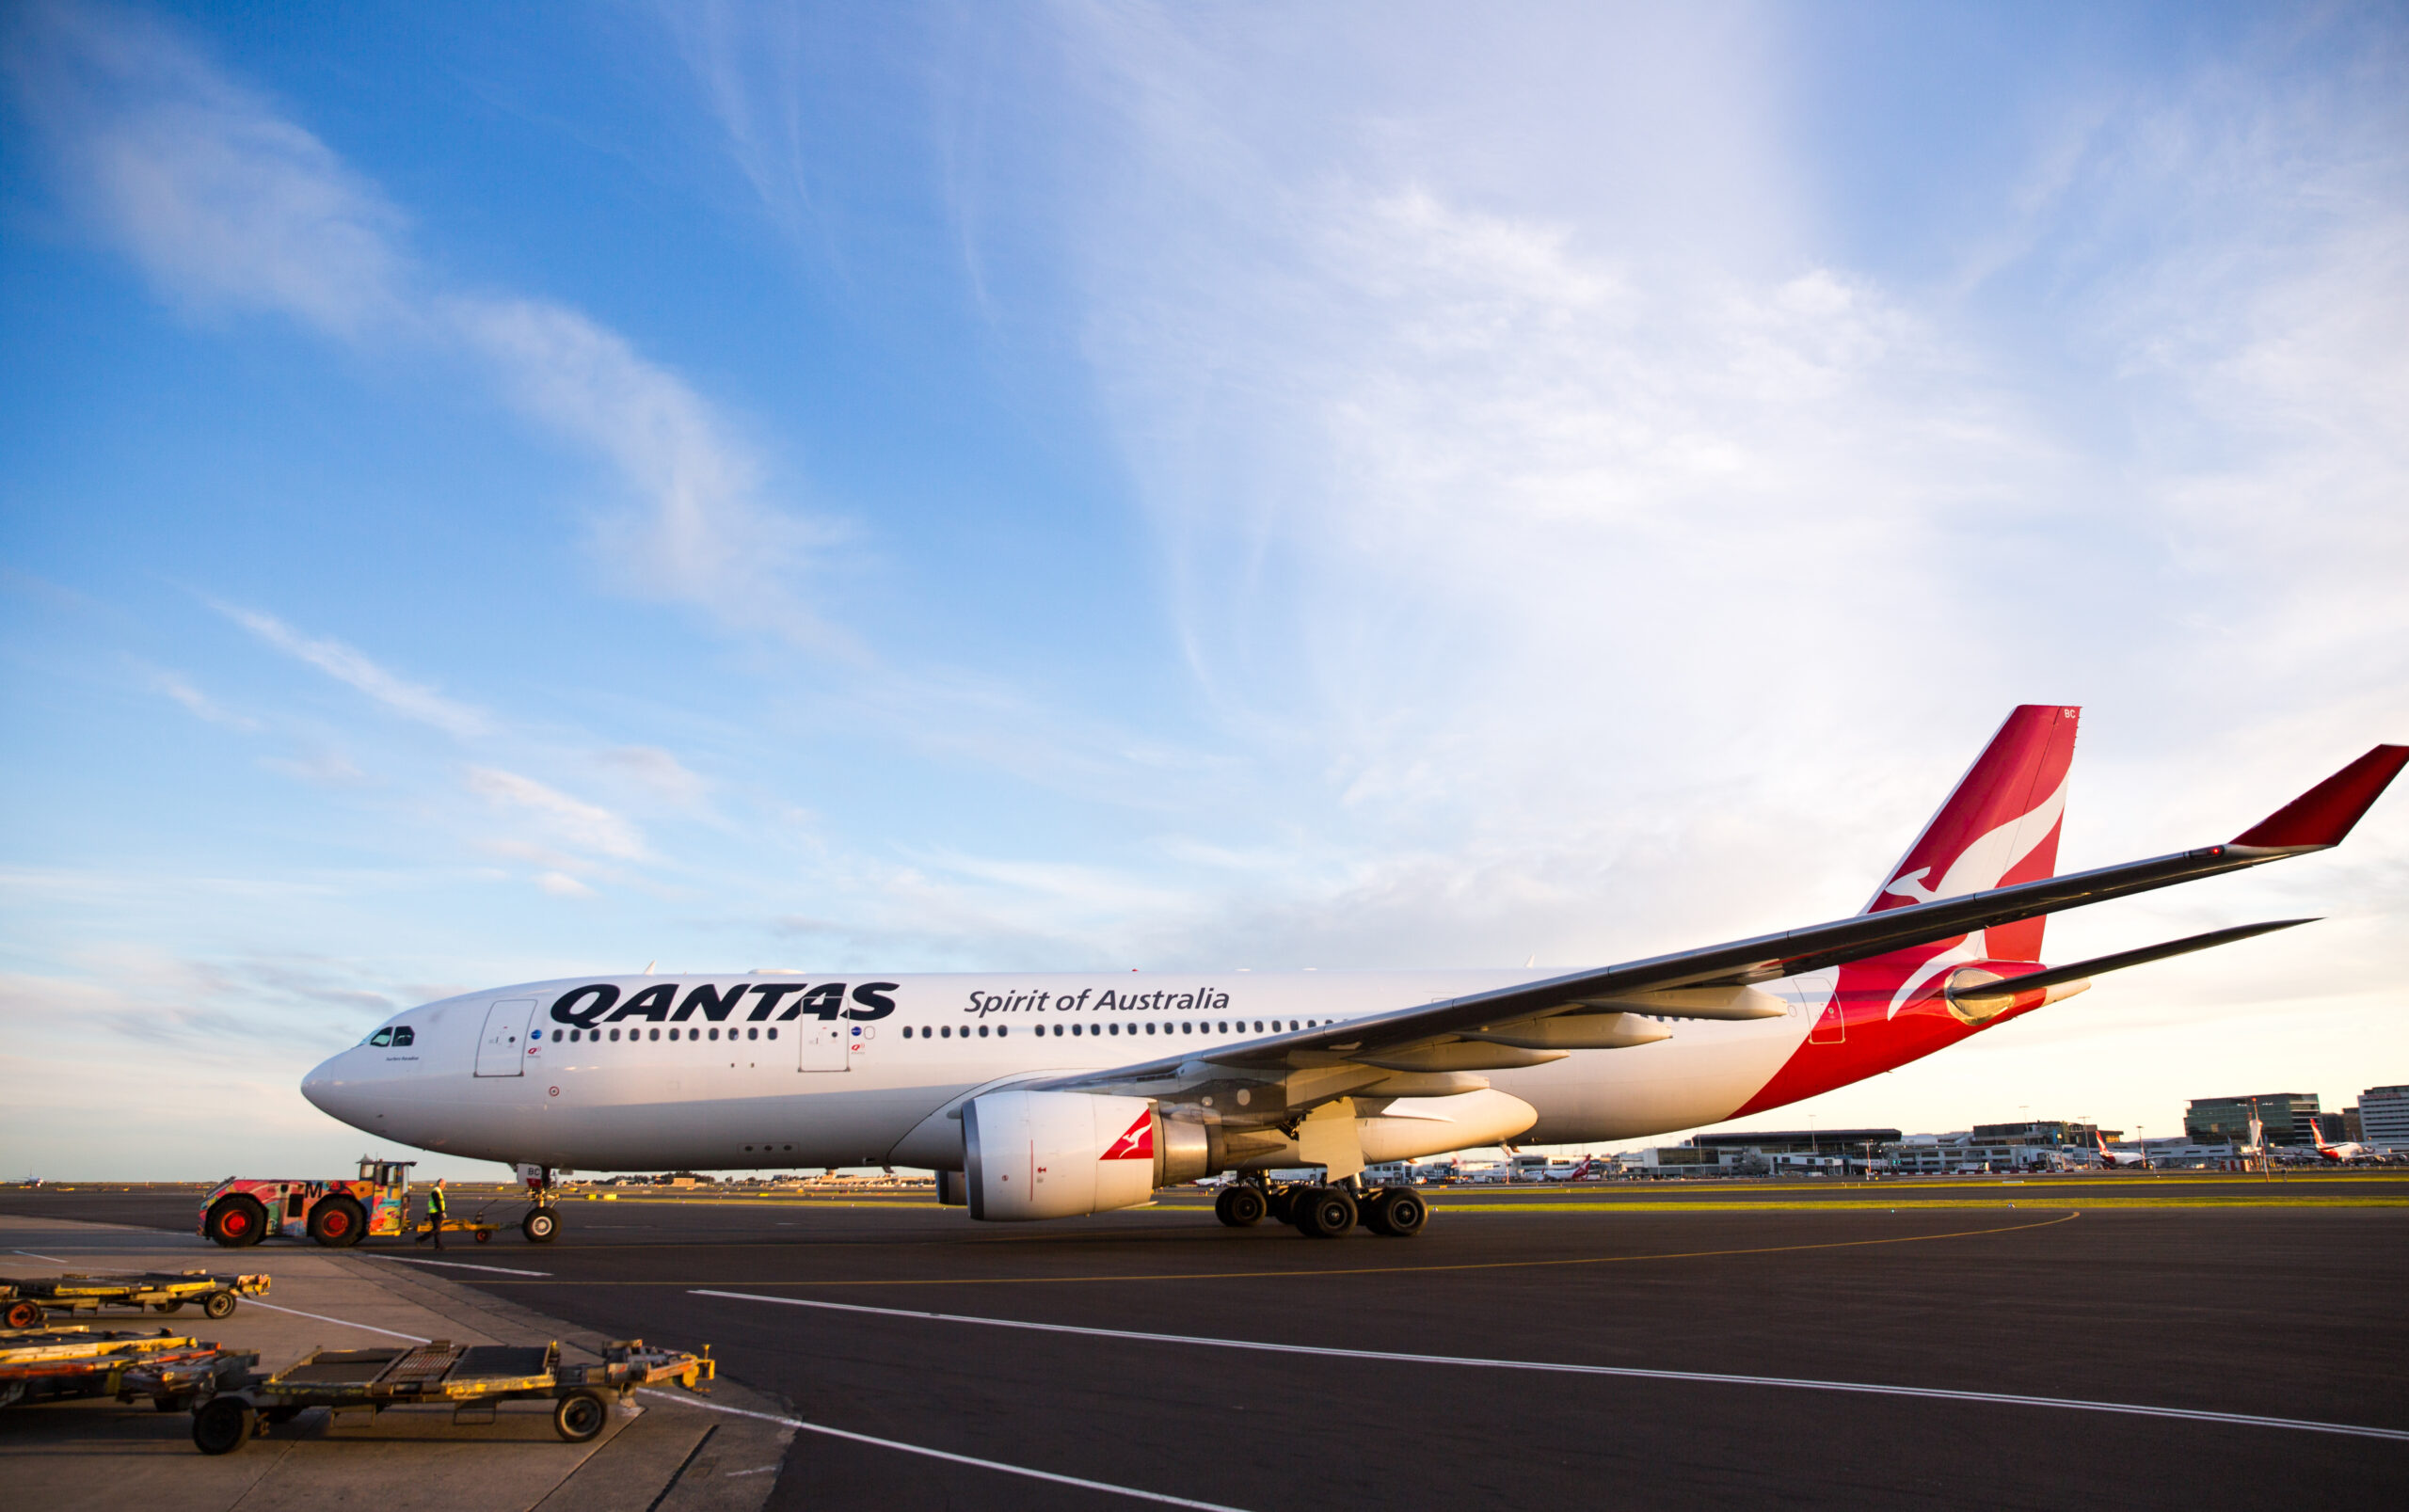 A Qantas A330 on the taxiway.